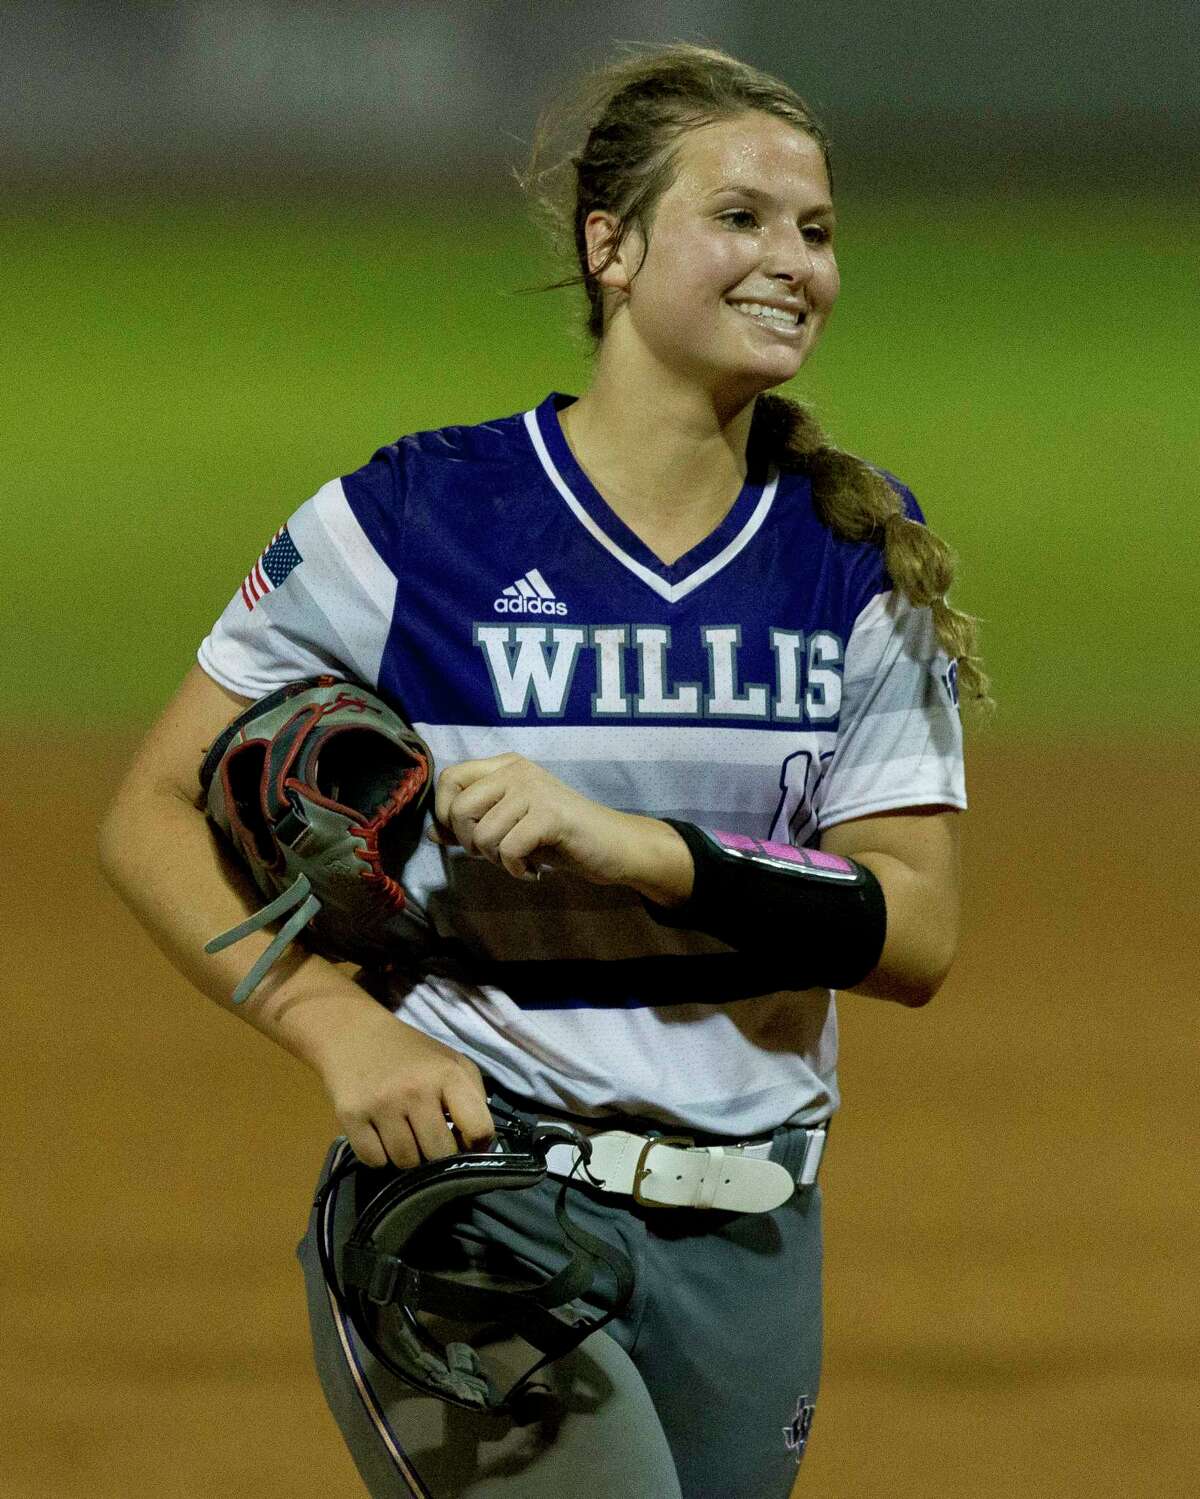 Willis starting pitcher Casey Dixon (10) smiles after striking out Autumn Dawson #9 of Barbers Hill to end the top of the fifth inning in Game 3 of a Region III-5A final high school softball series at Cougar Softball Stadium, Saturday, May 27, 2017, in Houston.